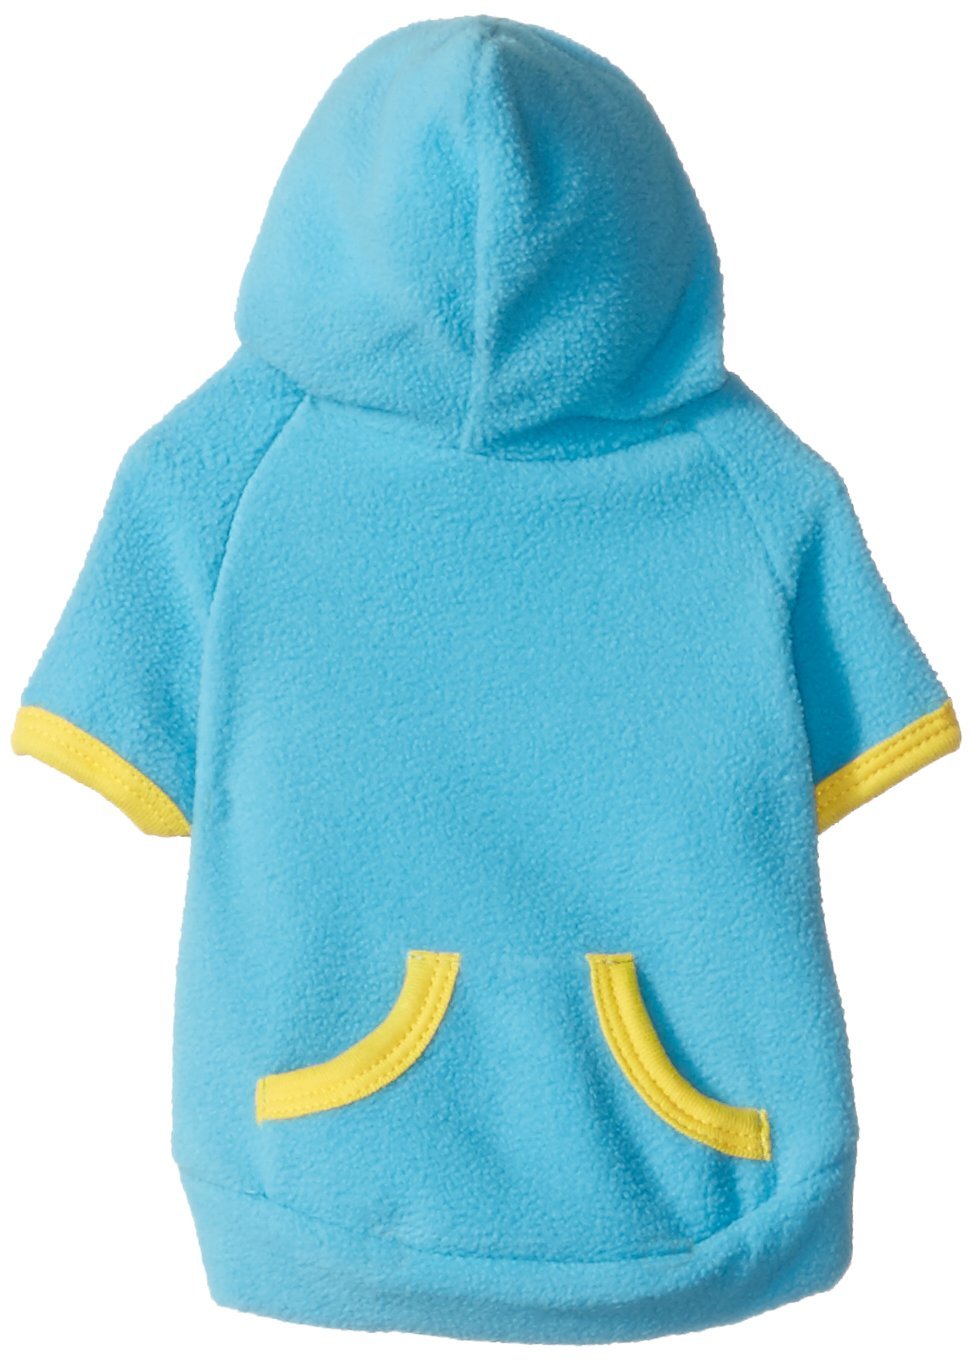 [Australia] - SMALLLEE_Lucky_Store Pet Clothes for Small Dog Cat Blank Fleece Coat Hoodie Jumper Sport Style Blue XS 